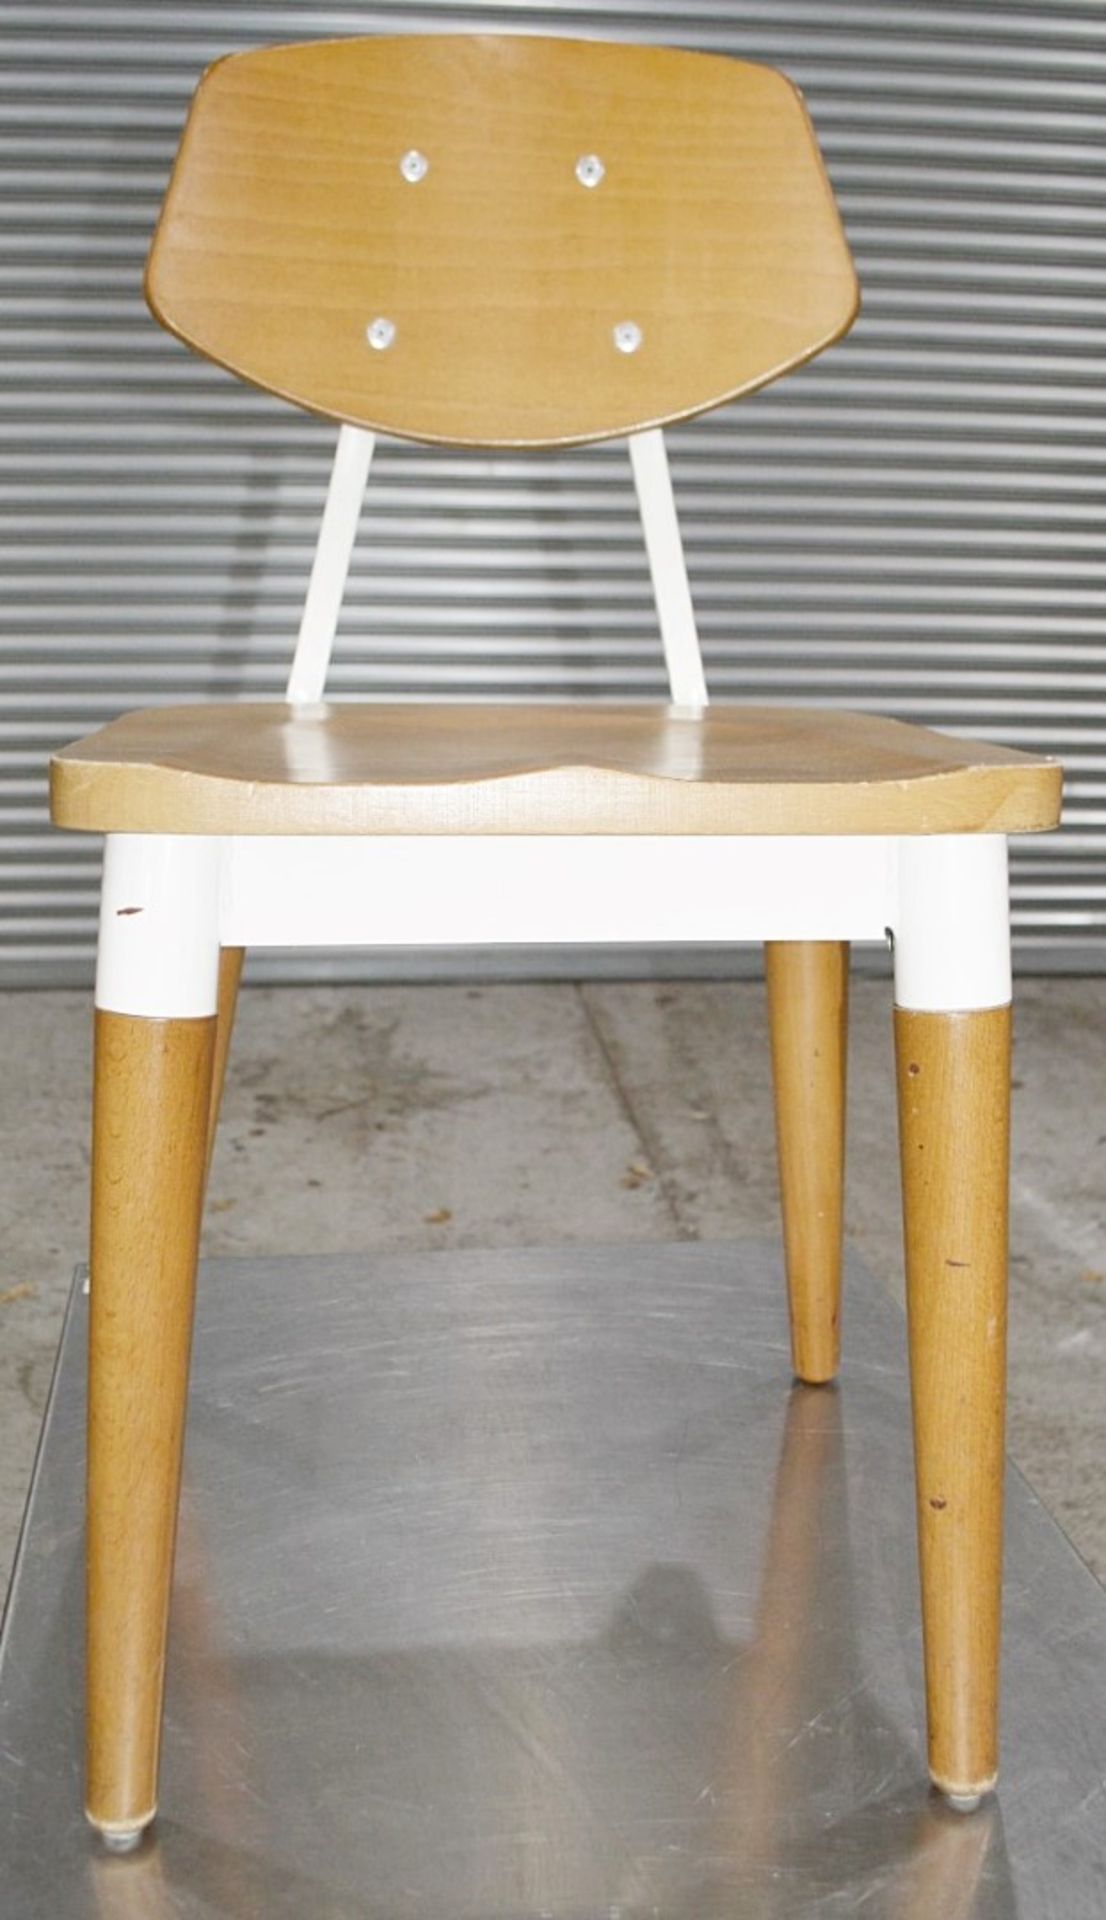 8 x Contemporary Commercial Dining Chairs With A Sturdy Light Wood And Metal - Image 2 of 4